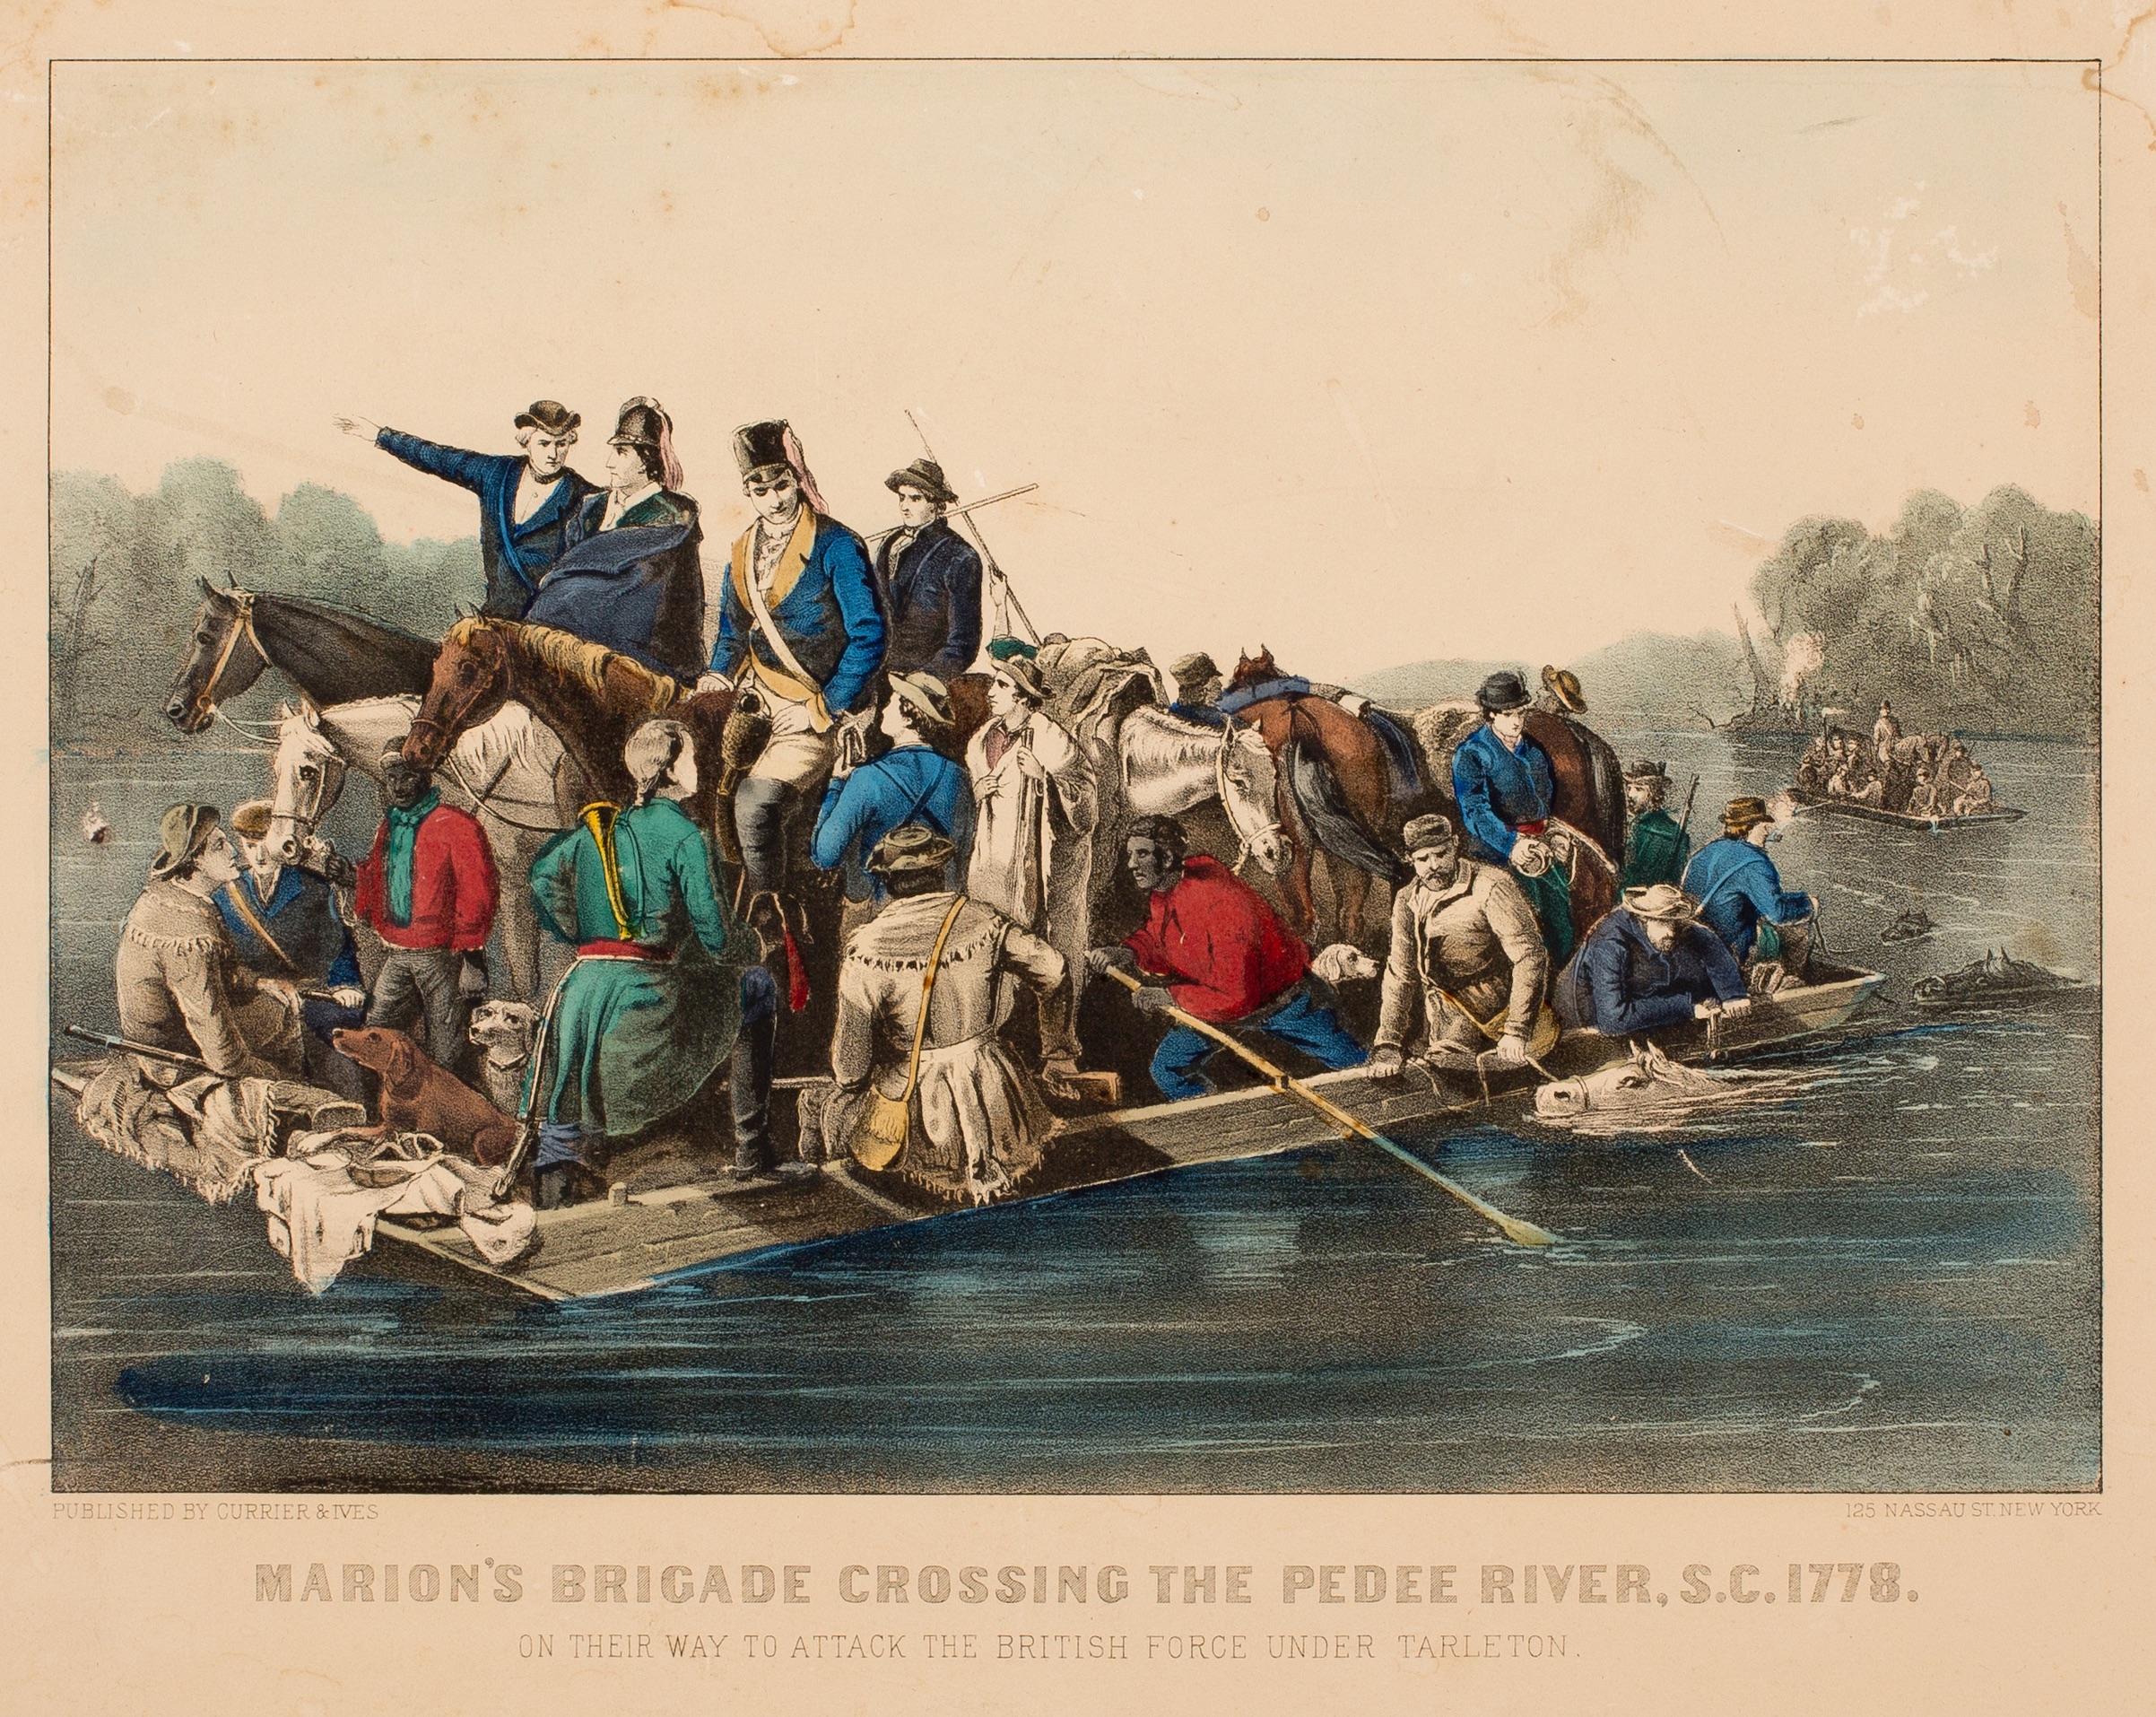 This Currier & Ives lithograph reproduces William Tylee Ranney's Marion Crossing the Peede.